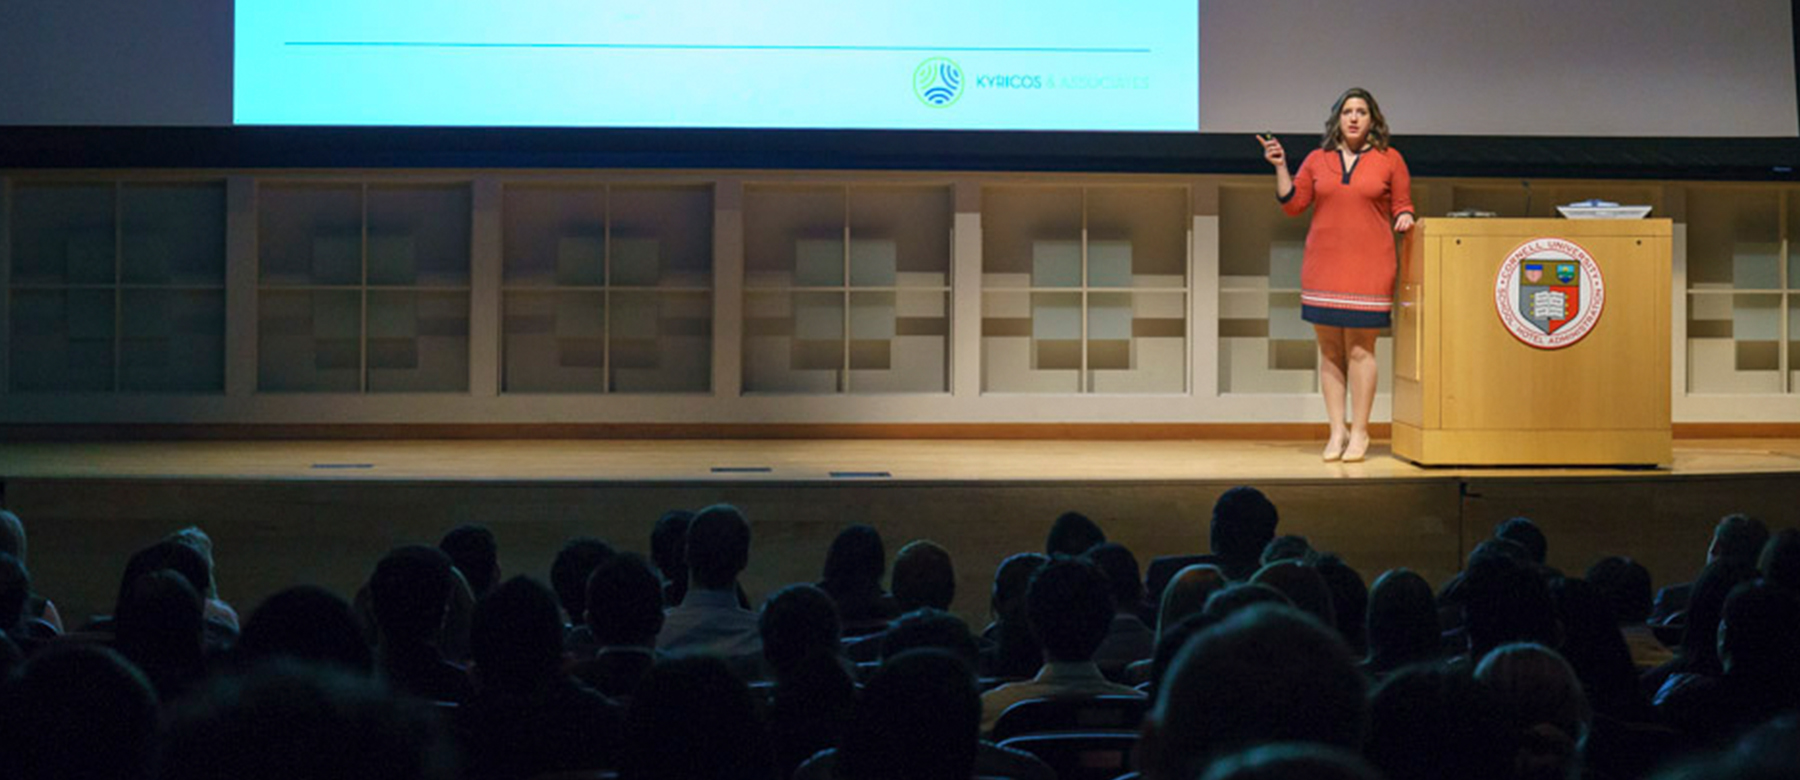 Woman presenting on stage in an auditorium